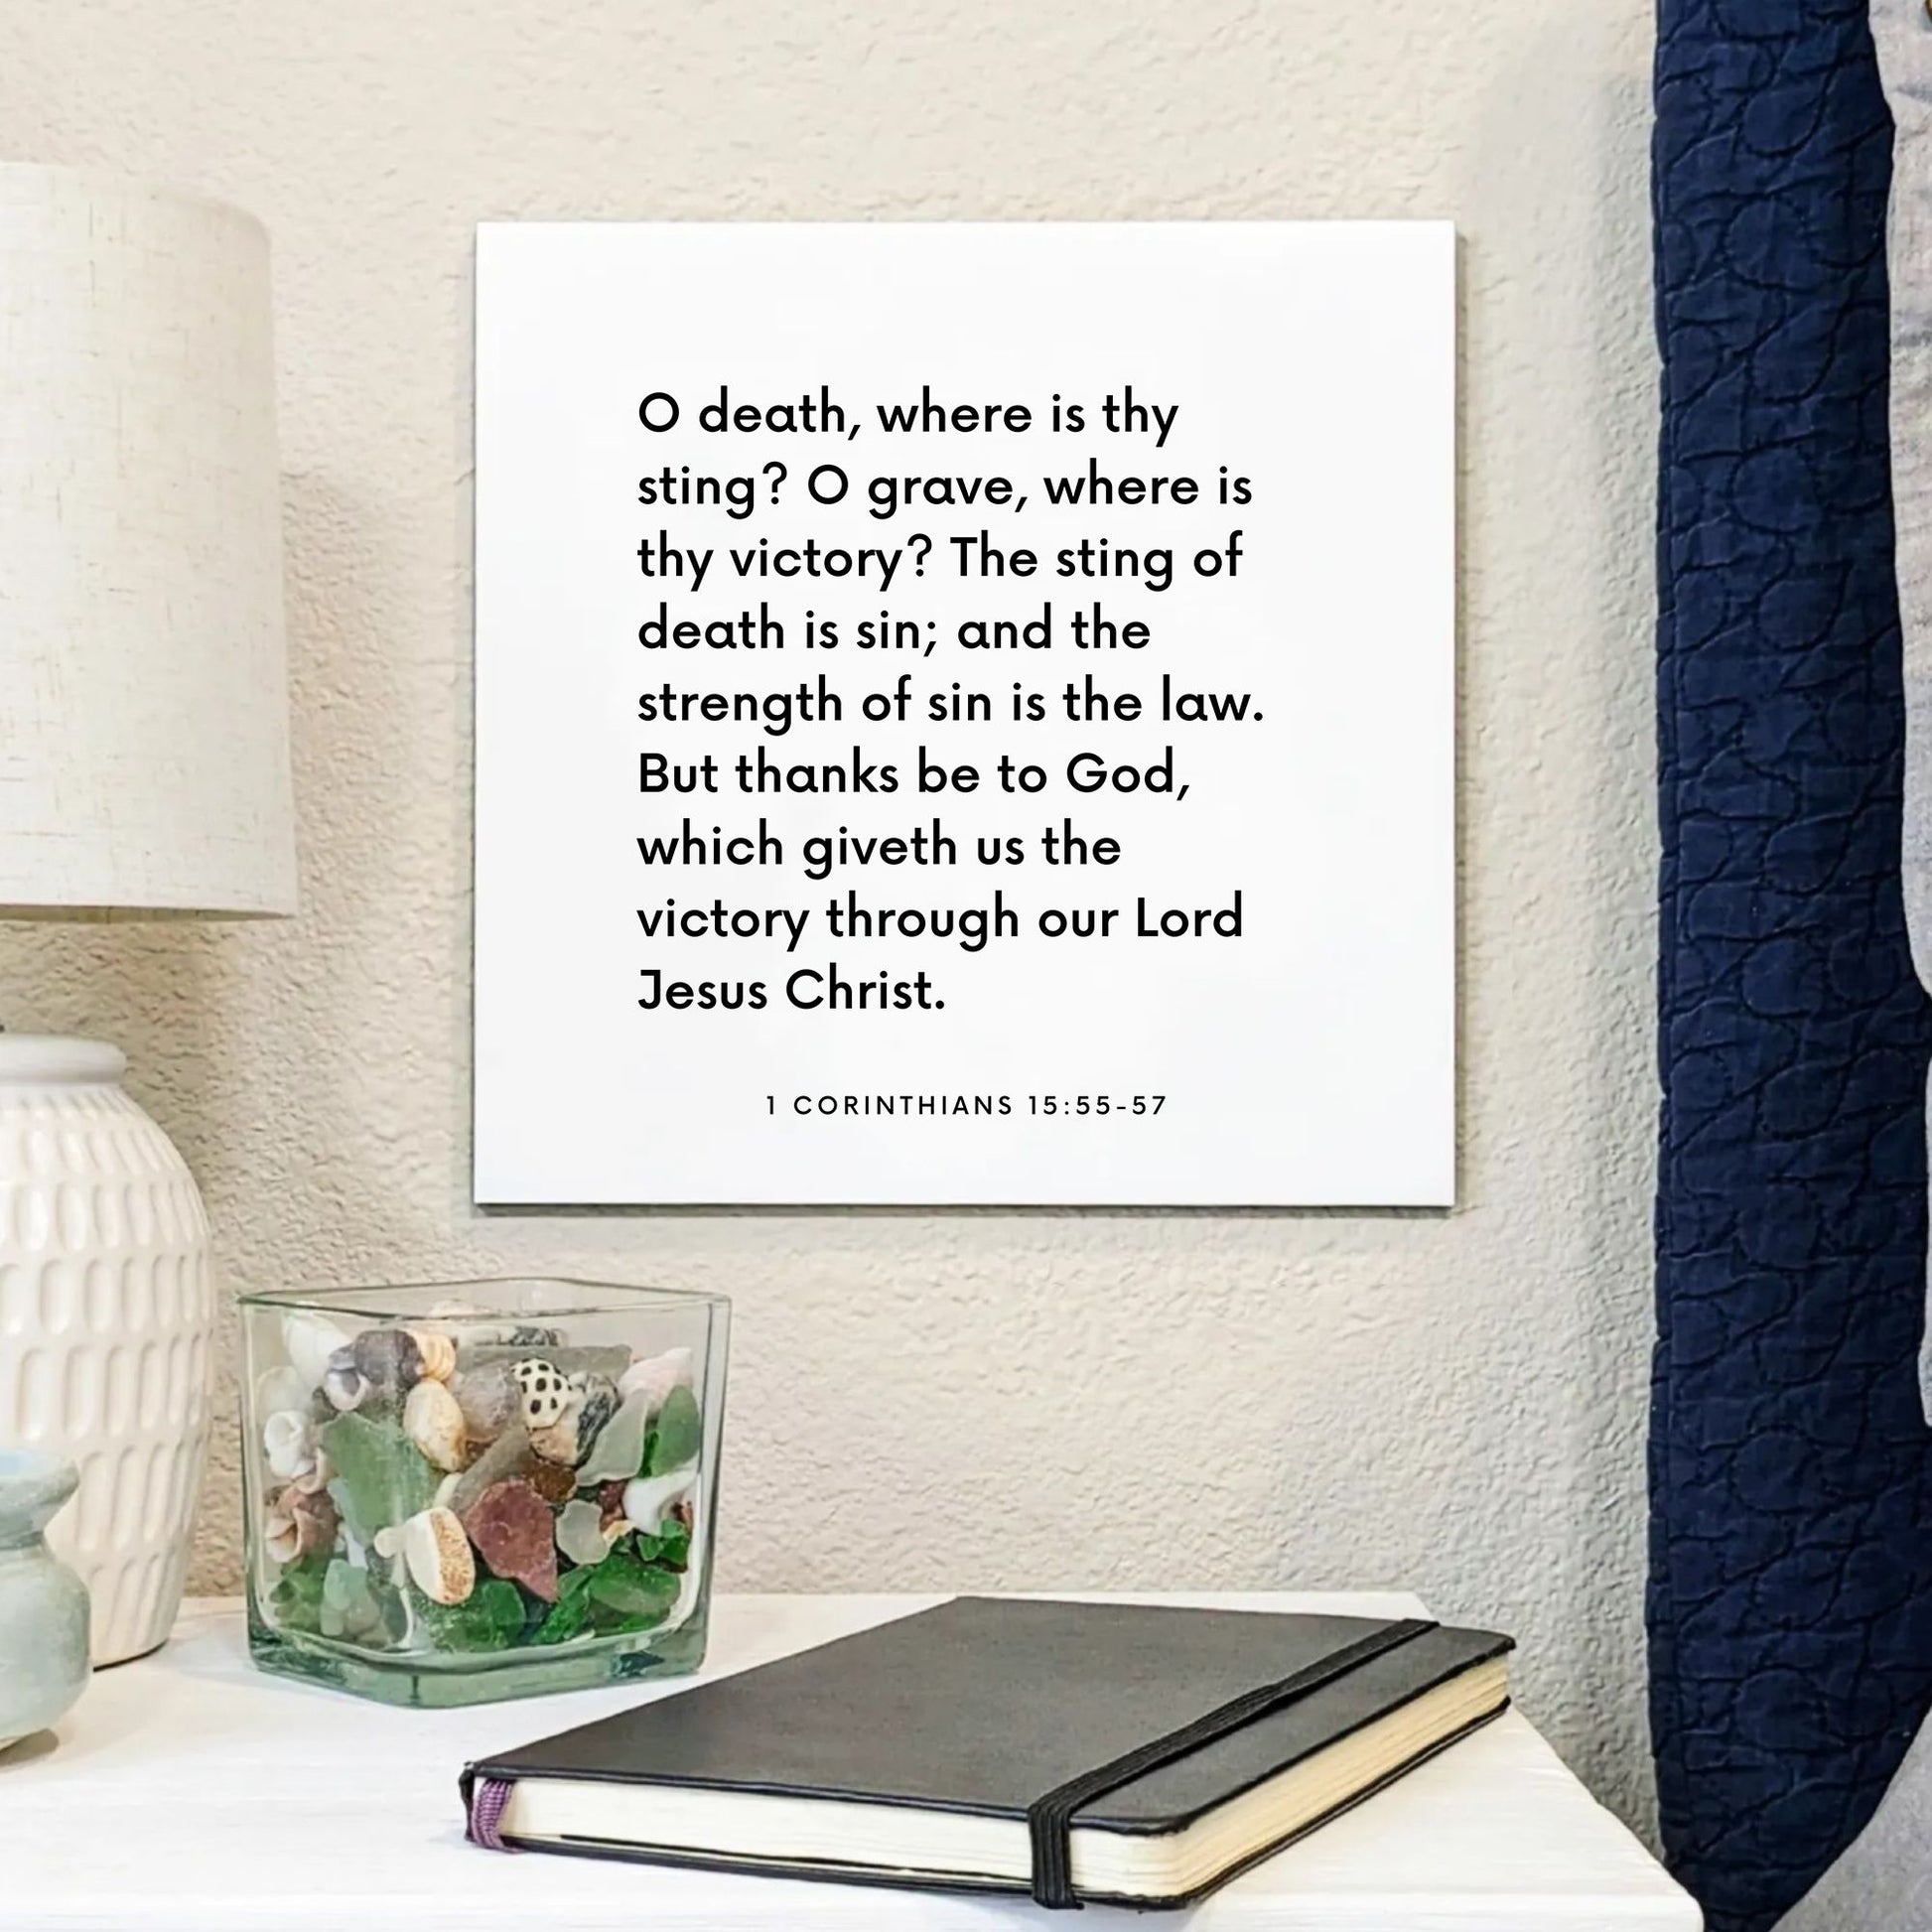 Bedside mouting of the scripture tile for 1 Corinthians 15:55-57 - "O death, where is thy sting? O grave, where is thy victory?"